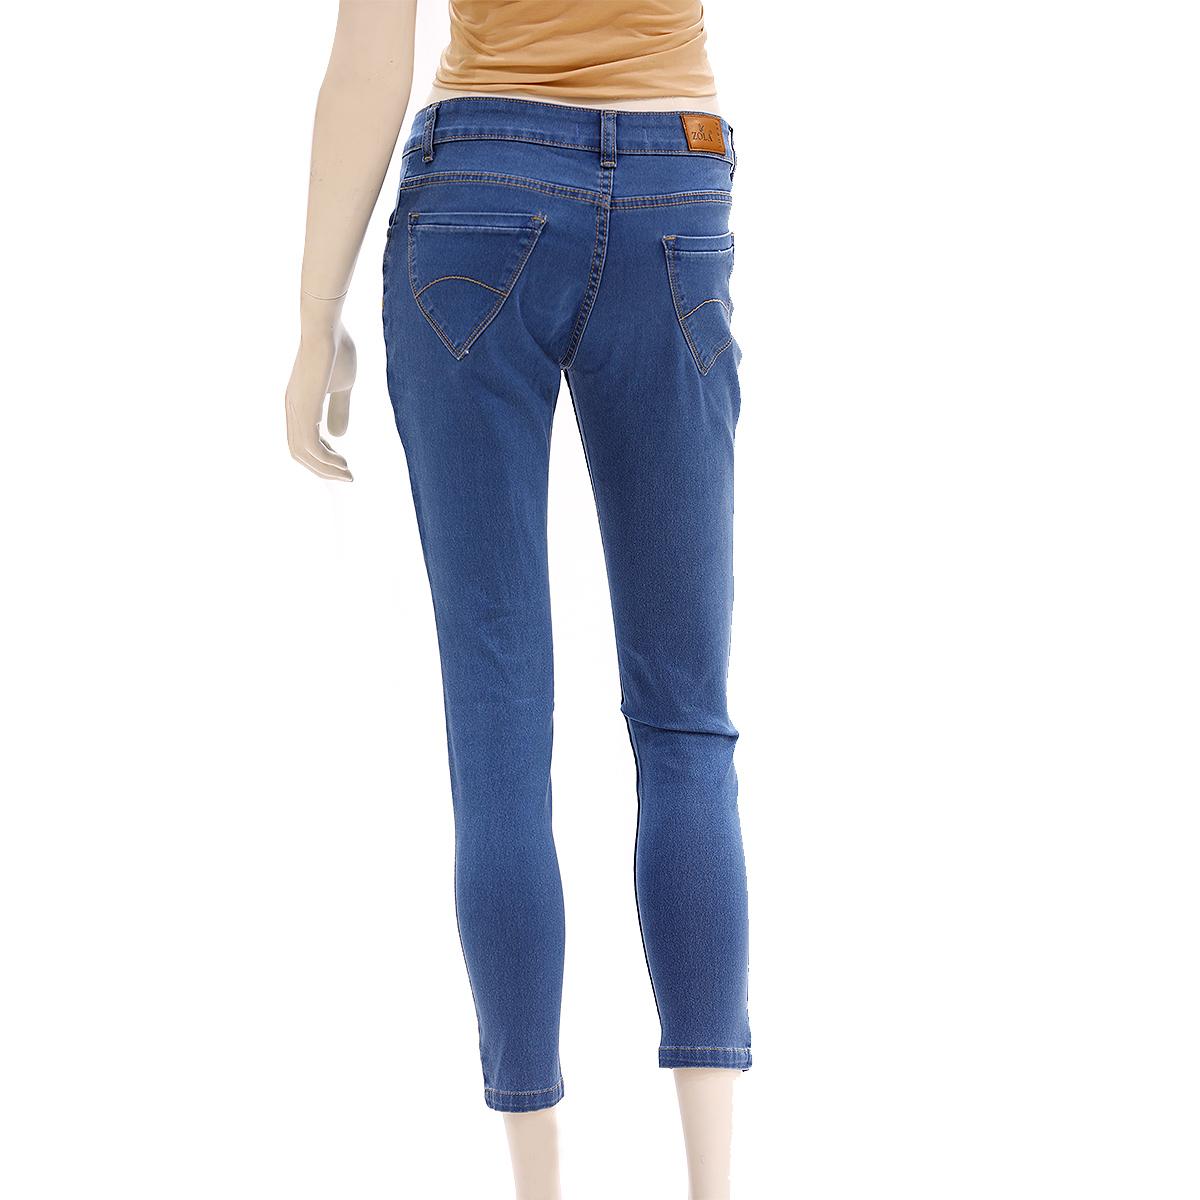 Zola Ankle Length Mid Waist Silky Finished Jeans With 1 Button Fly Front Zip Opening - Stone/Mid Blue, Size-30